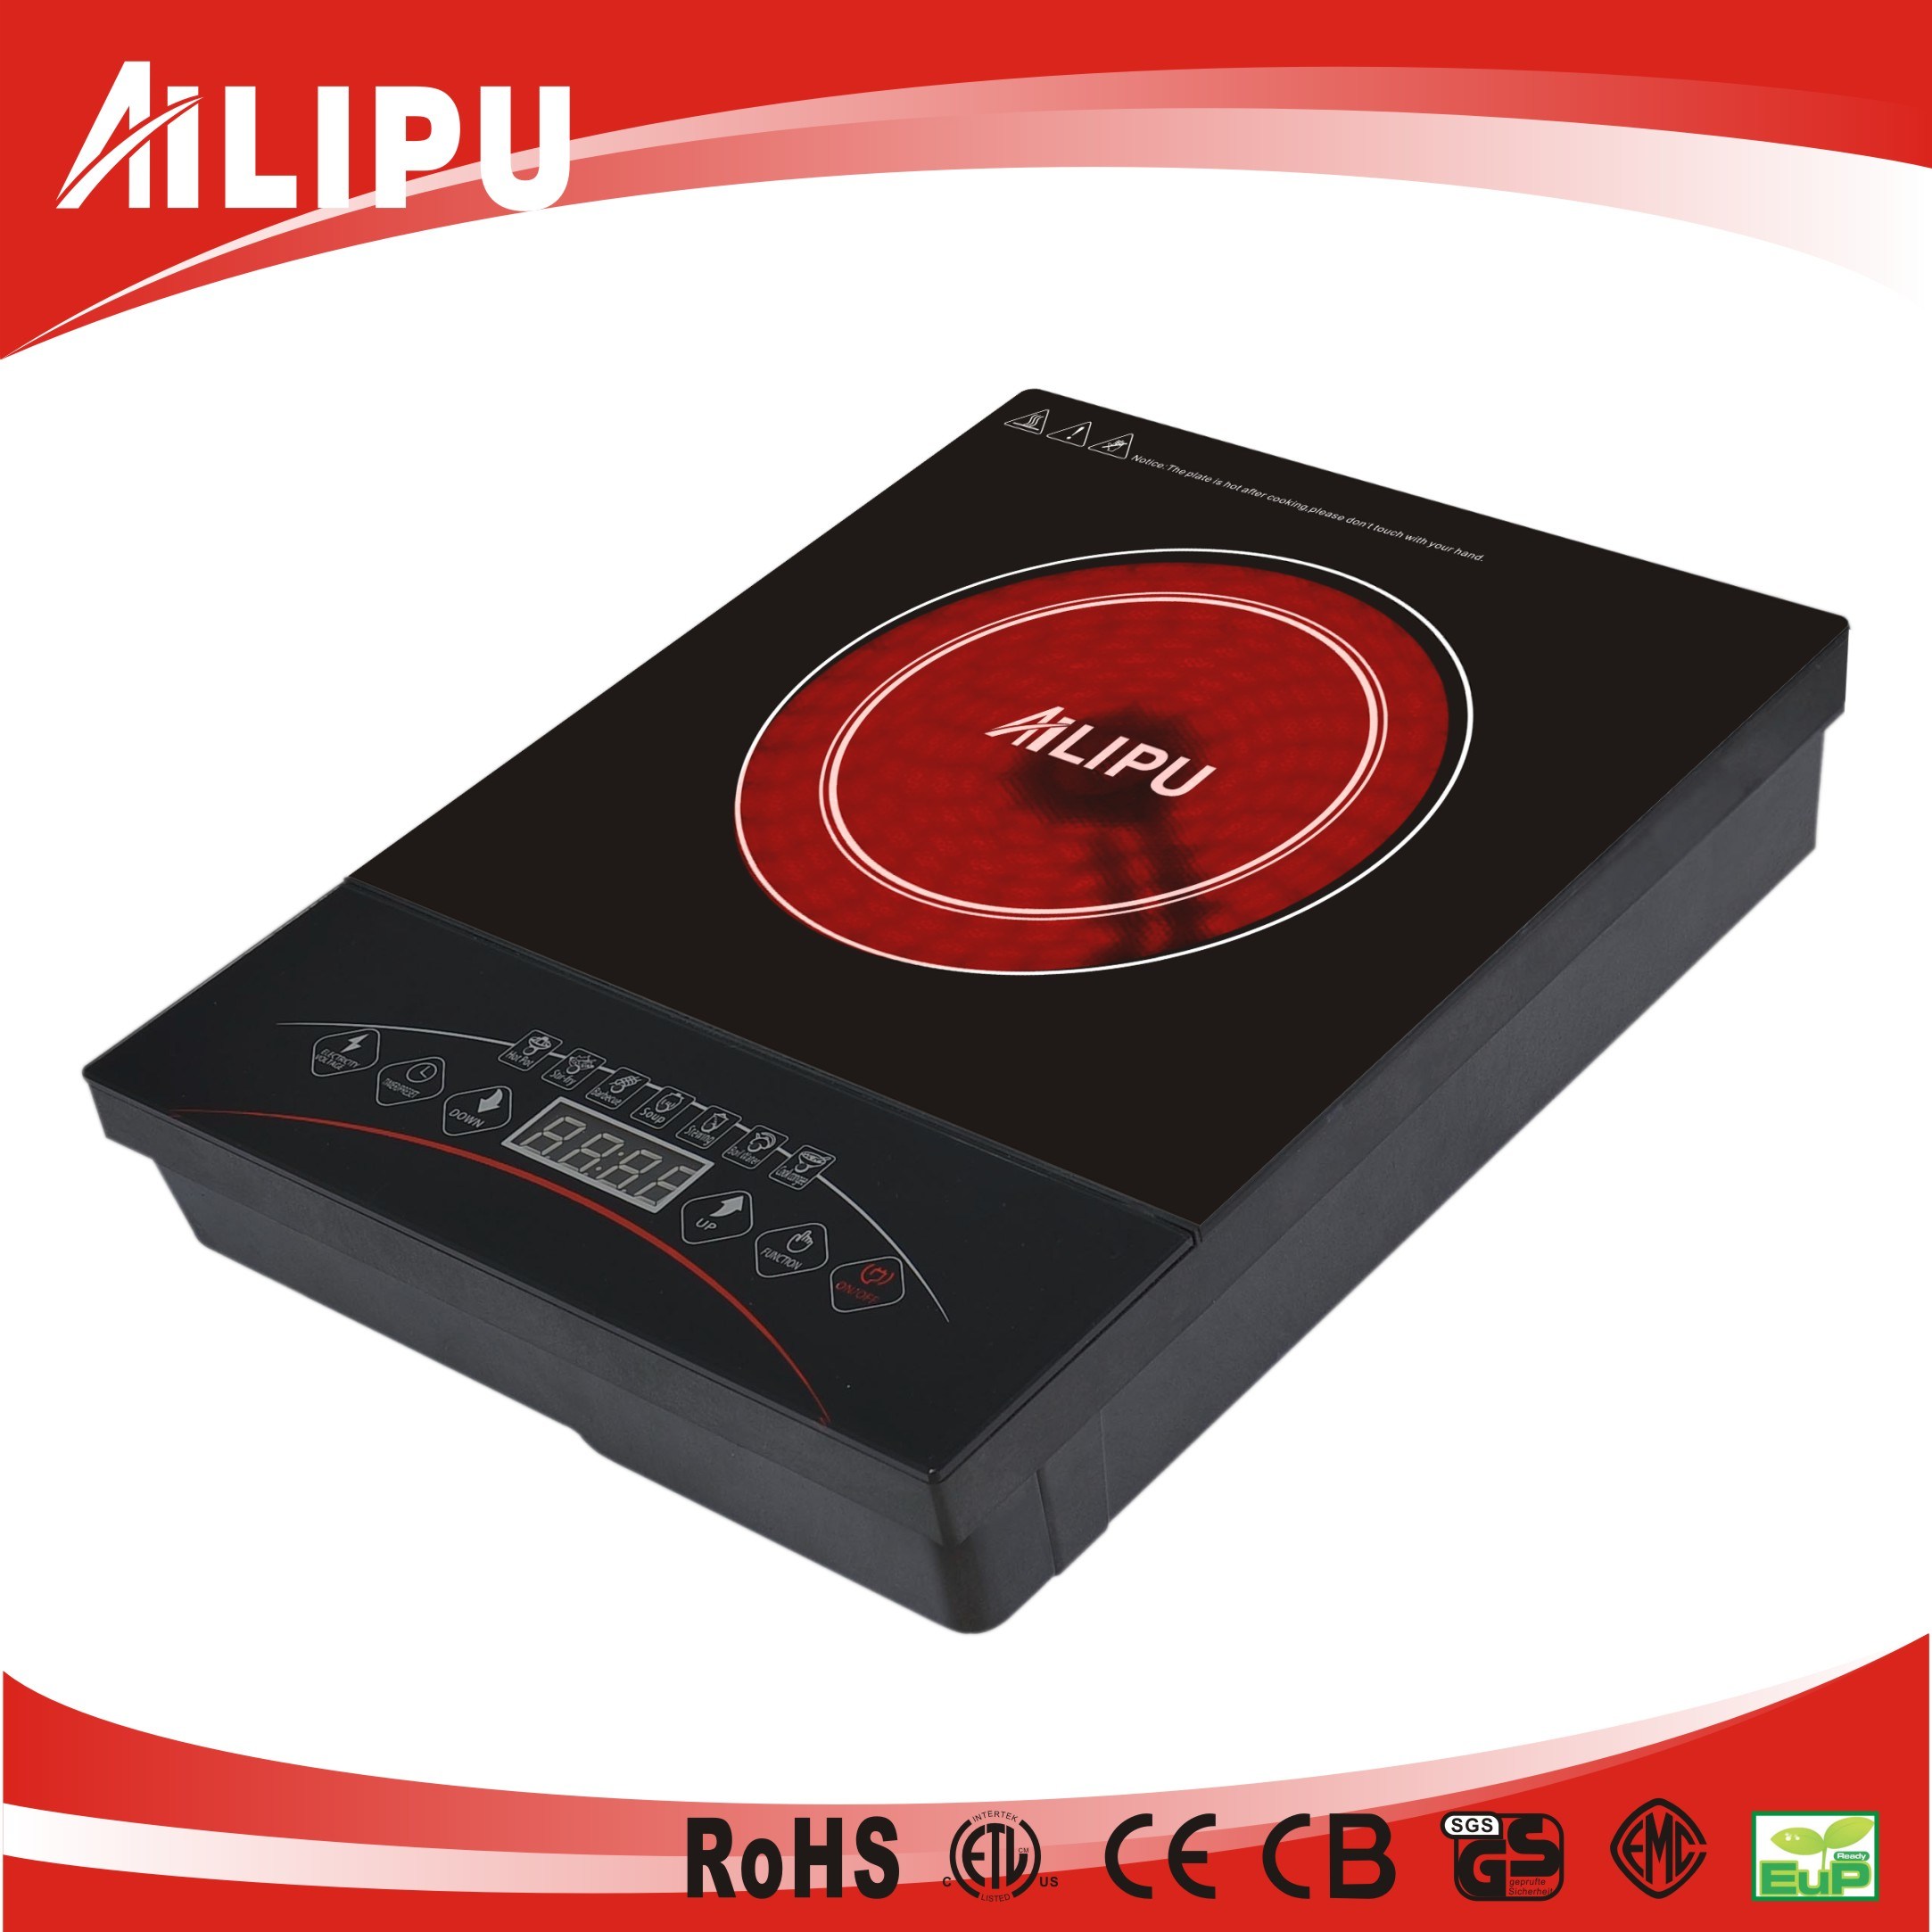 Ailipu Single Portable Radiant Cooker for BBQ and Warm Use